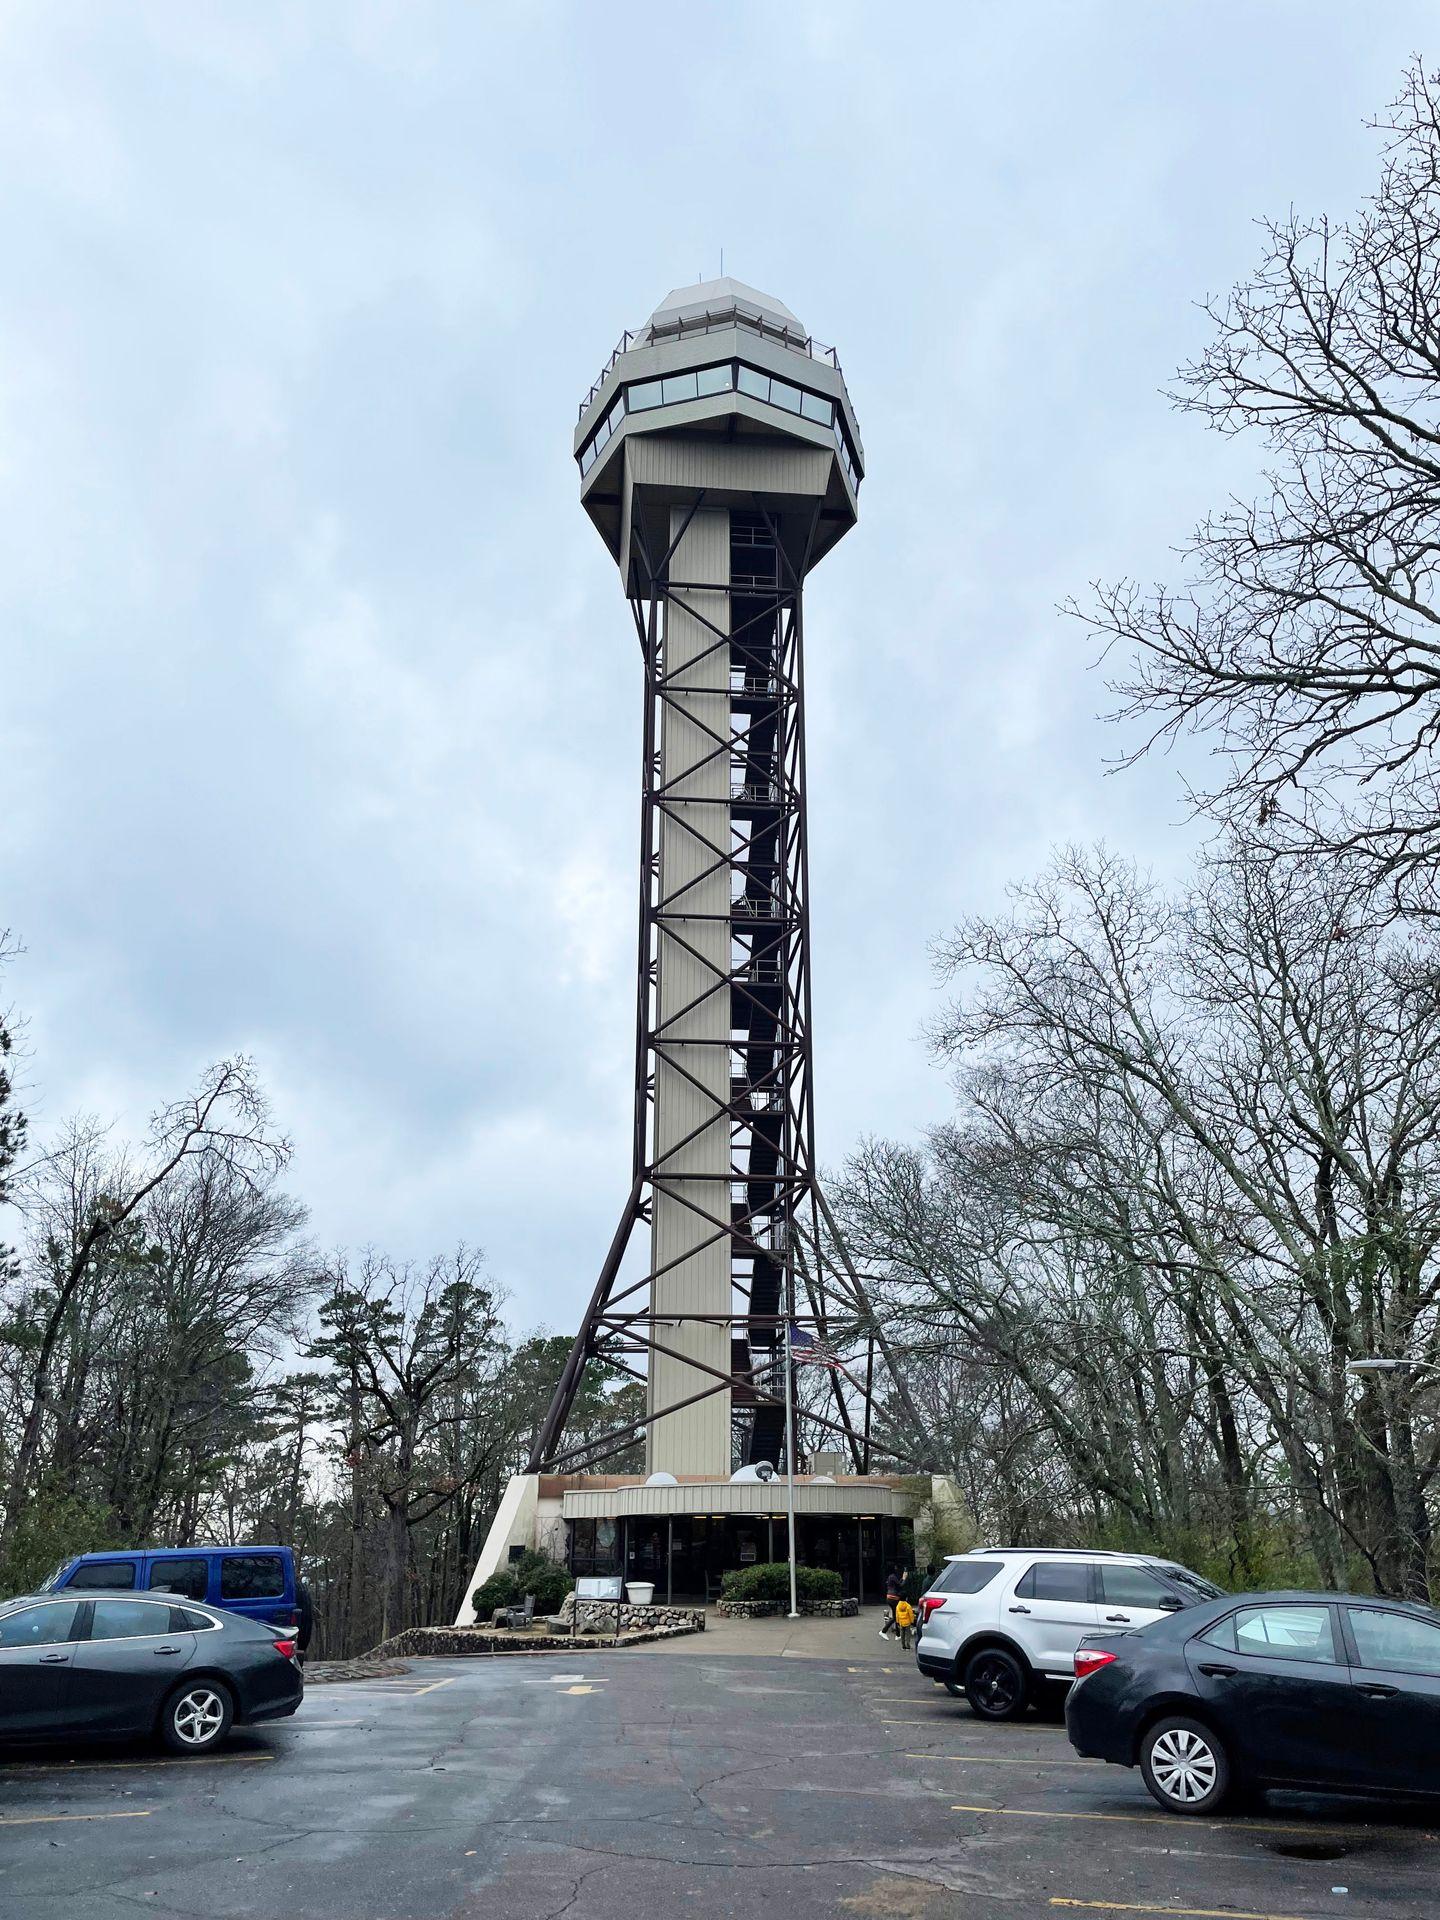 Looking up at the Hot Springs Mountain Tower from the parking lot.